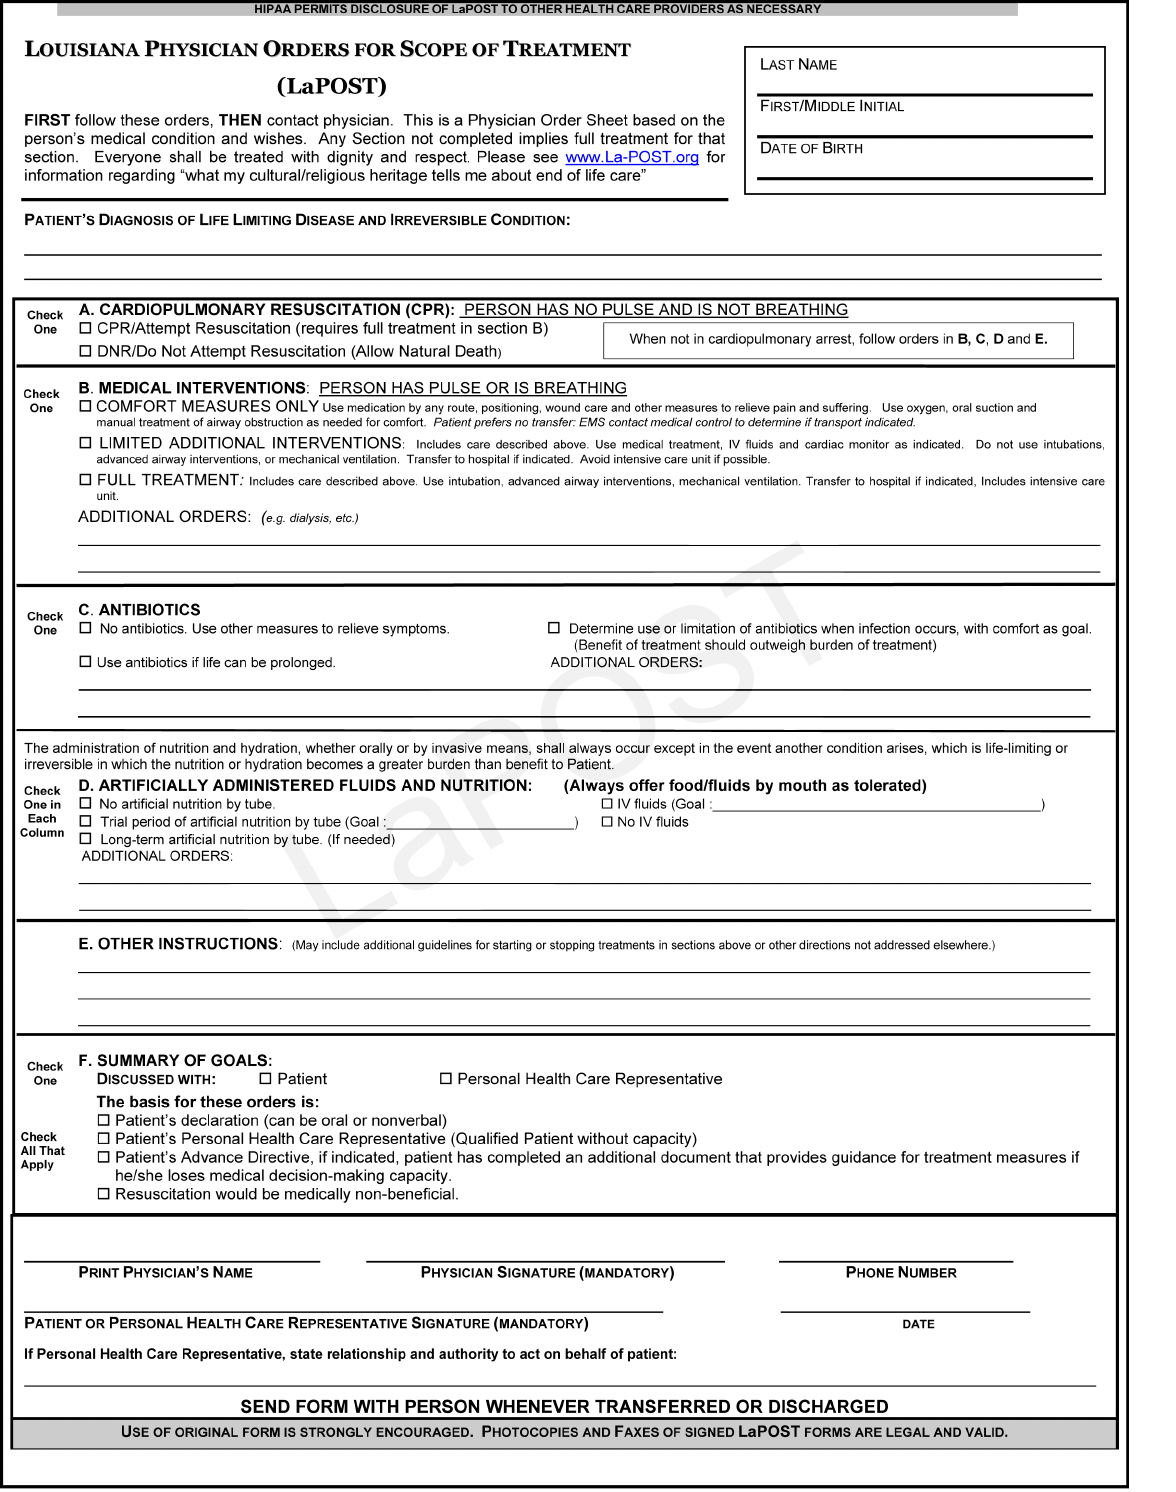 Louisiana Physician Orders For Scope of Treatment (POST) Form